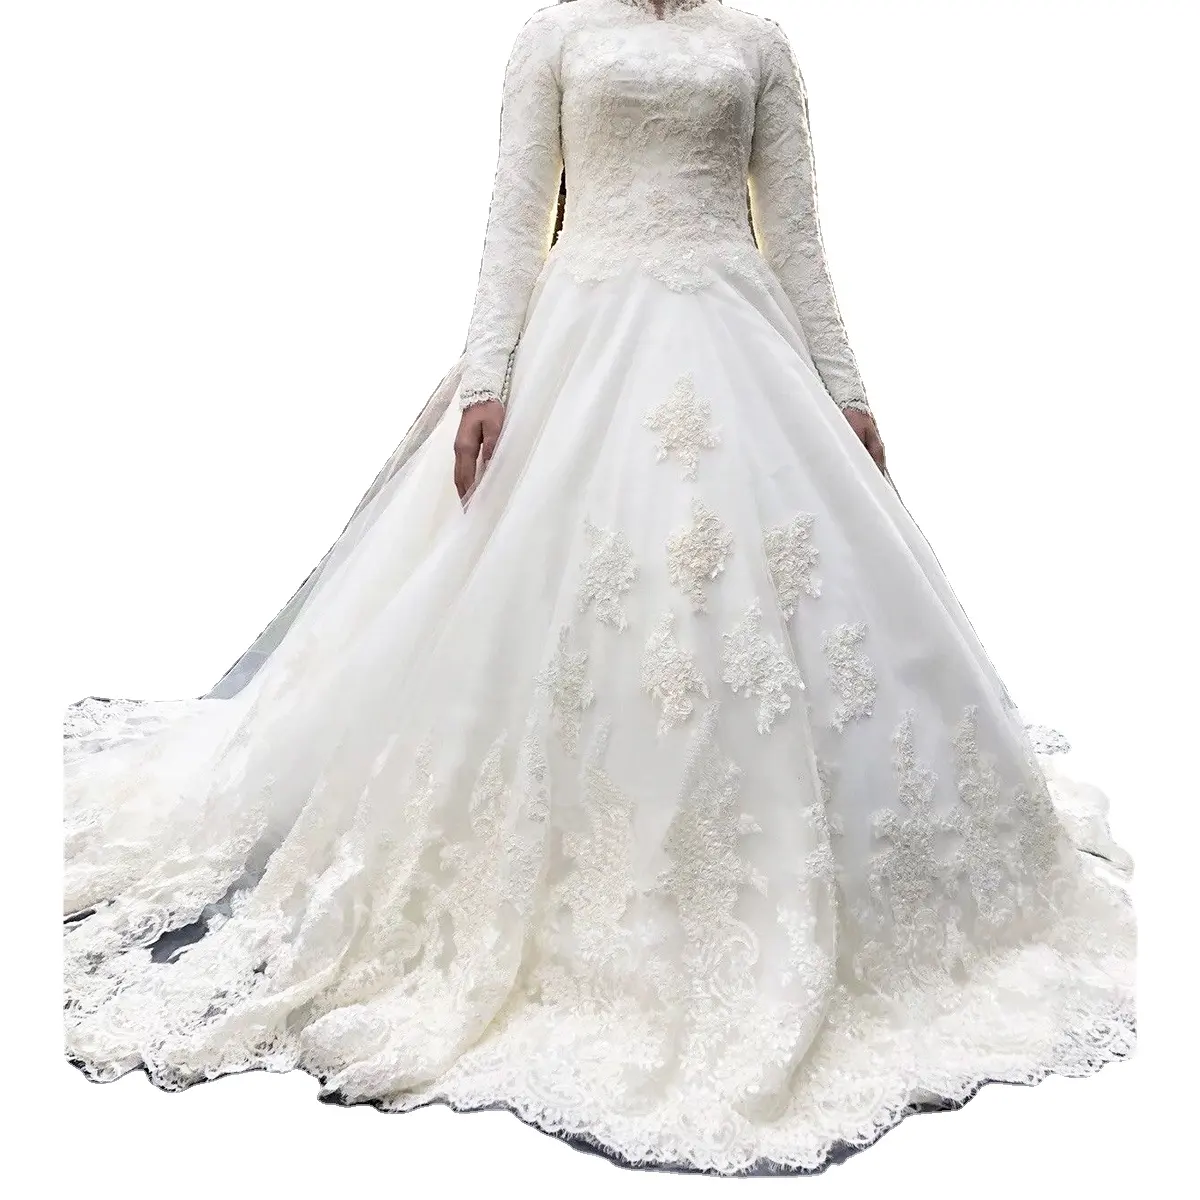 Luxury Muslim Long Sleeve Lace Wedding Dress Princess Ball Gown with Cathedral Train Elegant Bridal Gown for Women Saudi Arabia